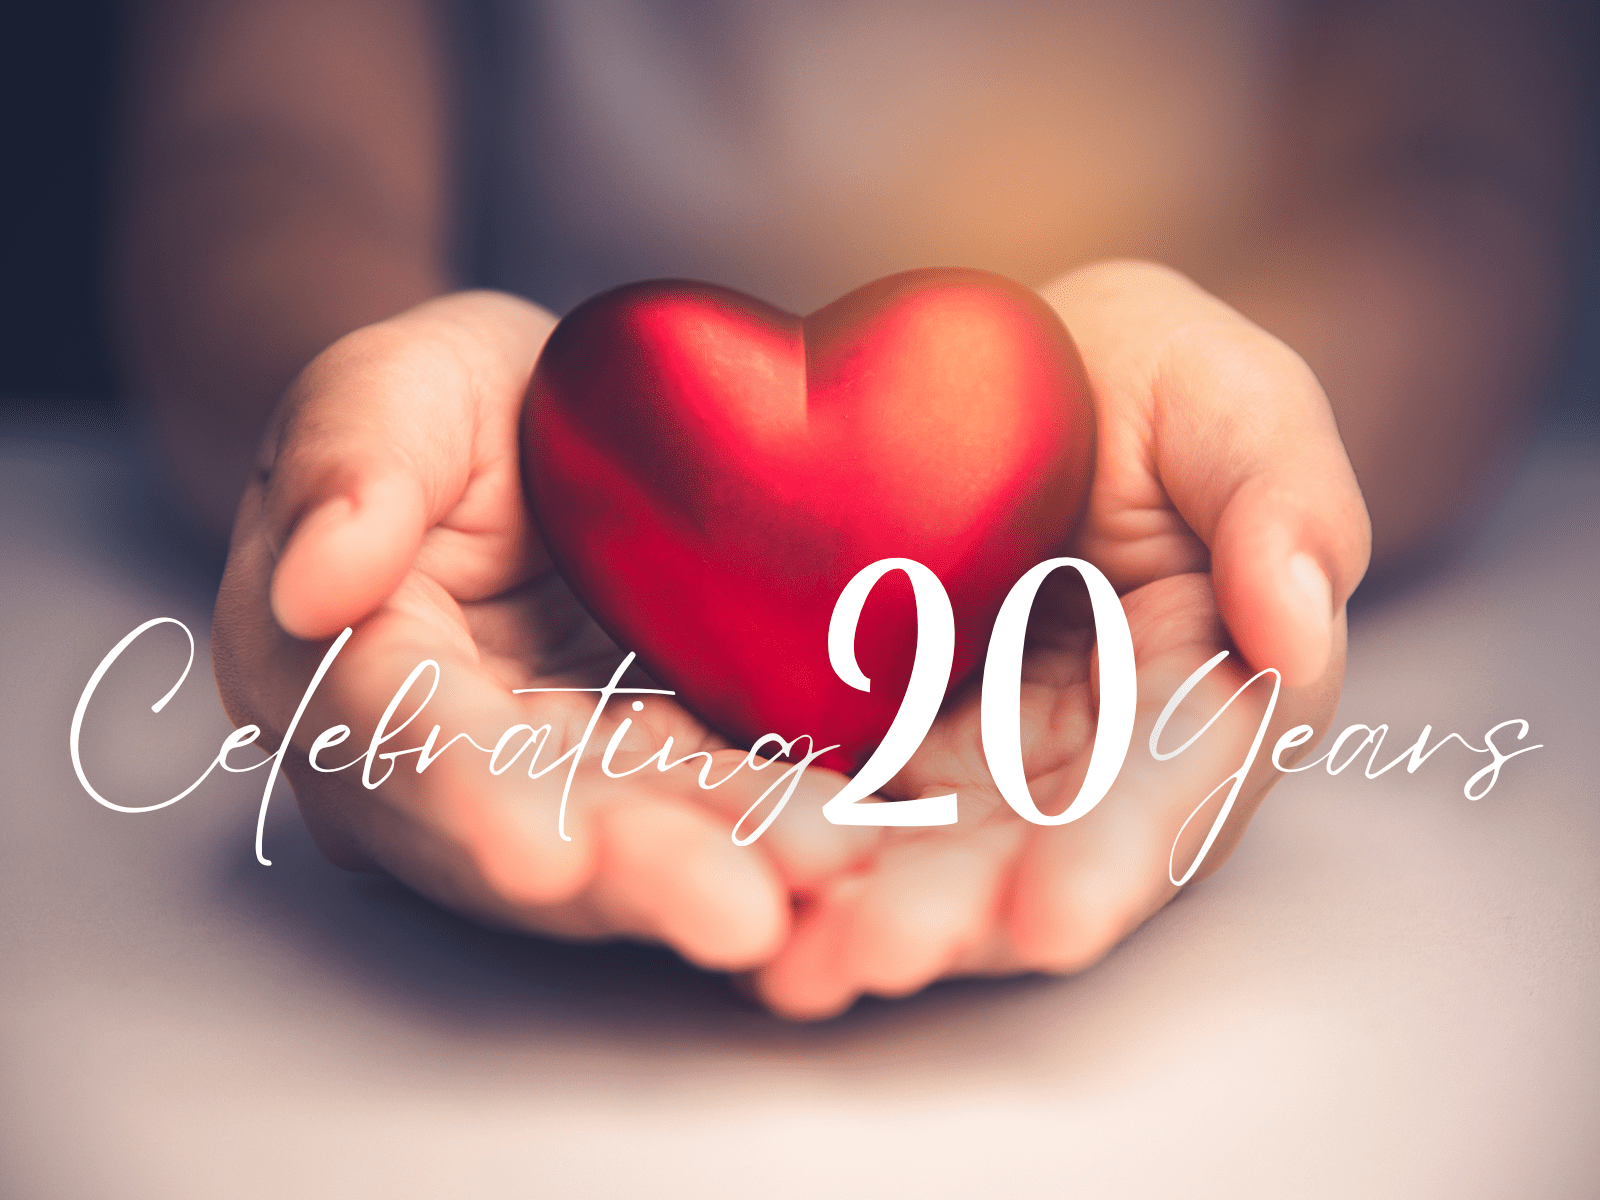 Celebrating 20 years as a nonprofit organization helping others meet life's challenges